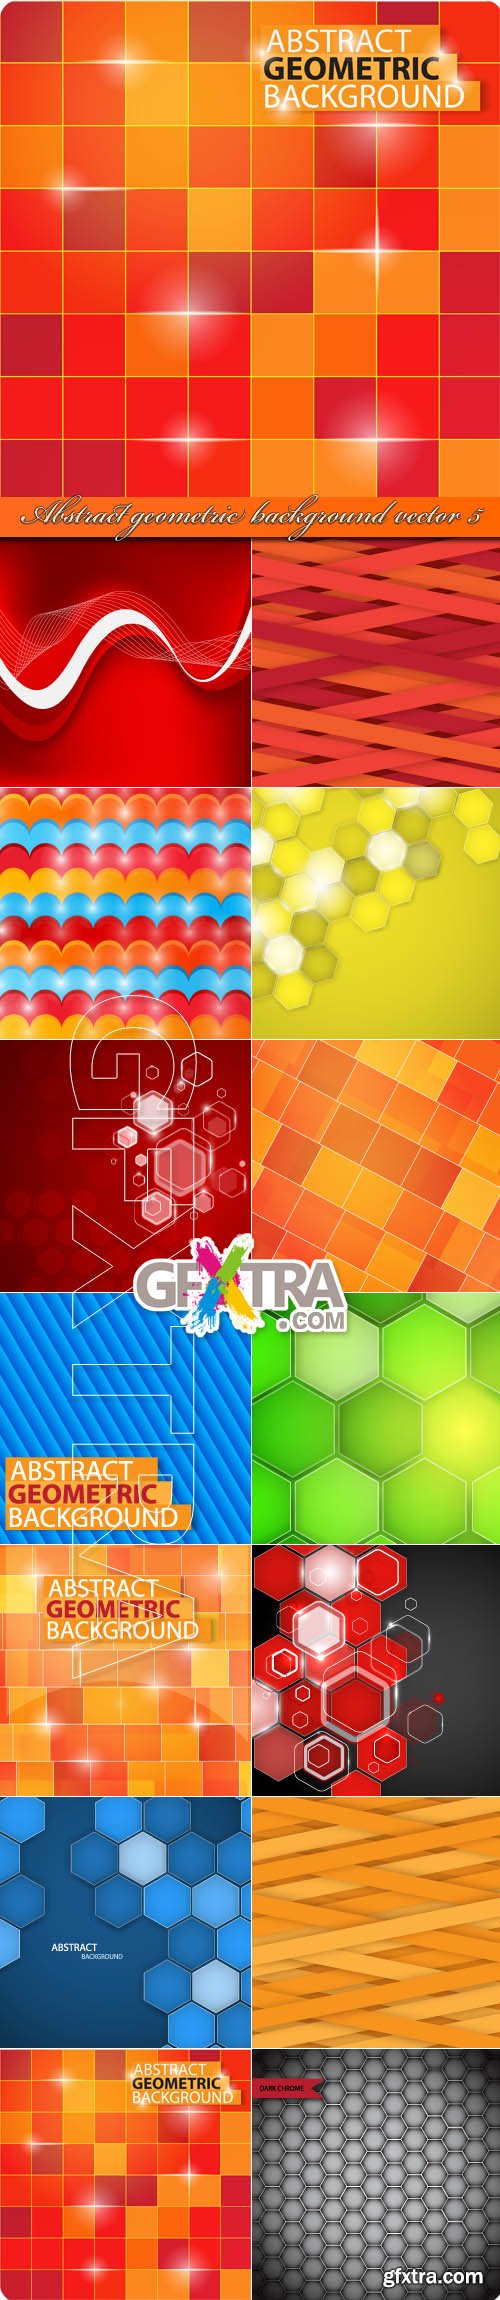 Abstract geometric background vector 5